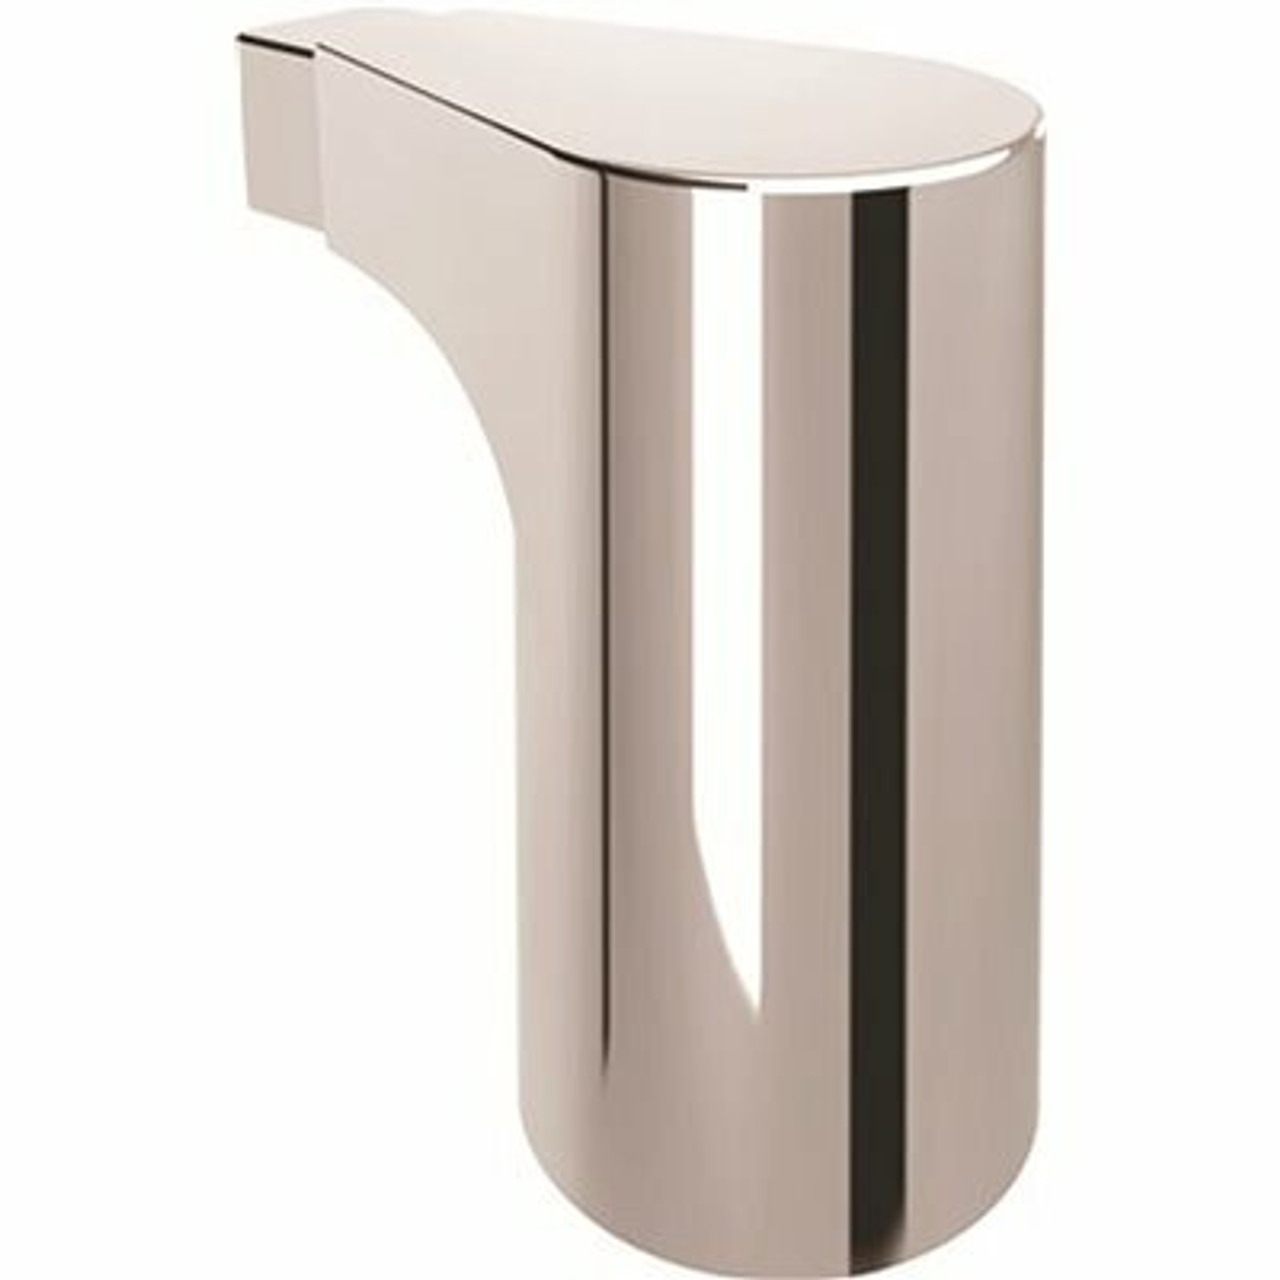 Cleveland Faucet Group Edgestone Towel Bar Mounting Post In Chrome